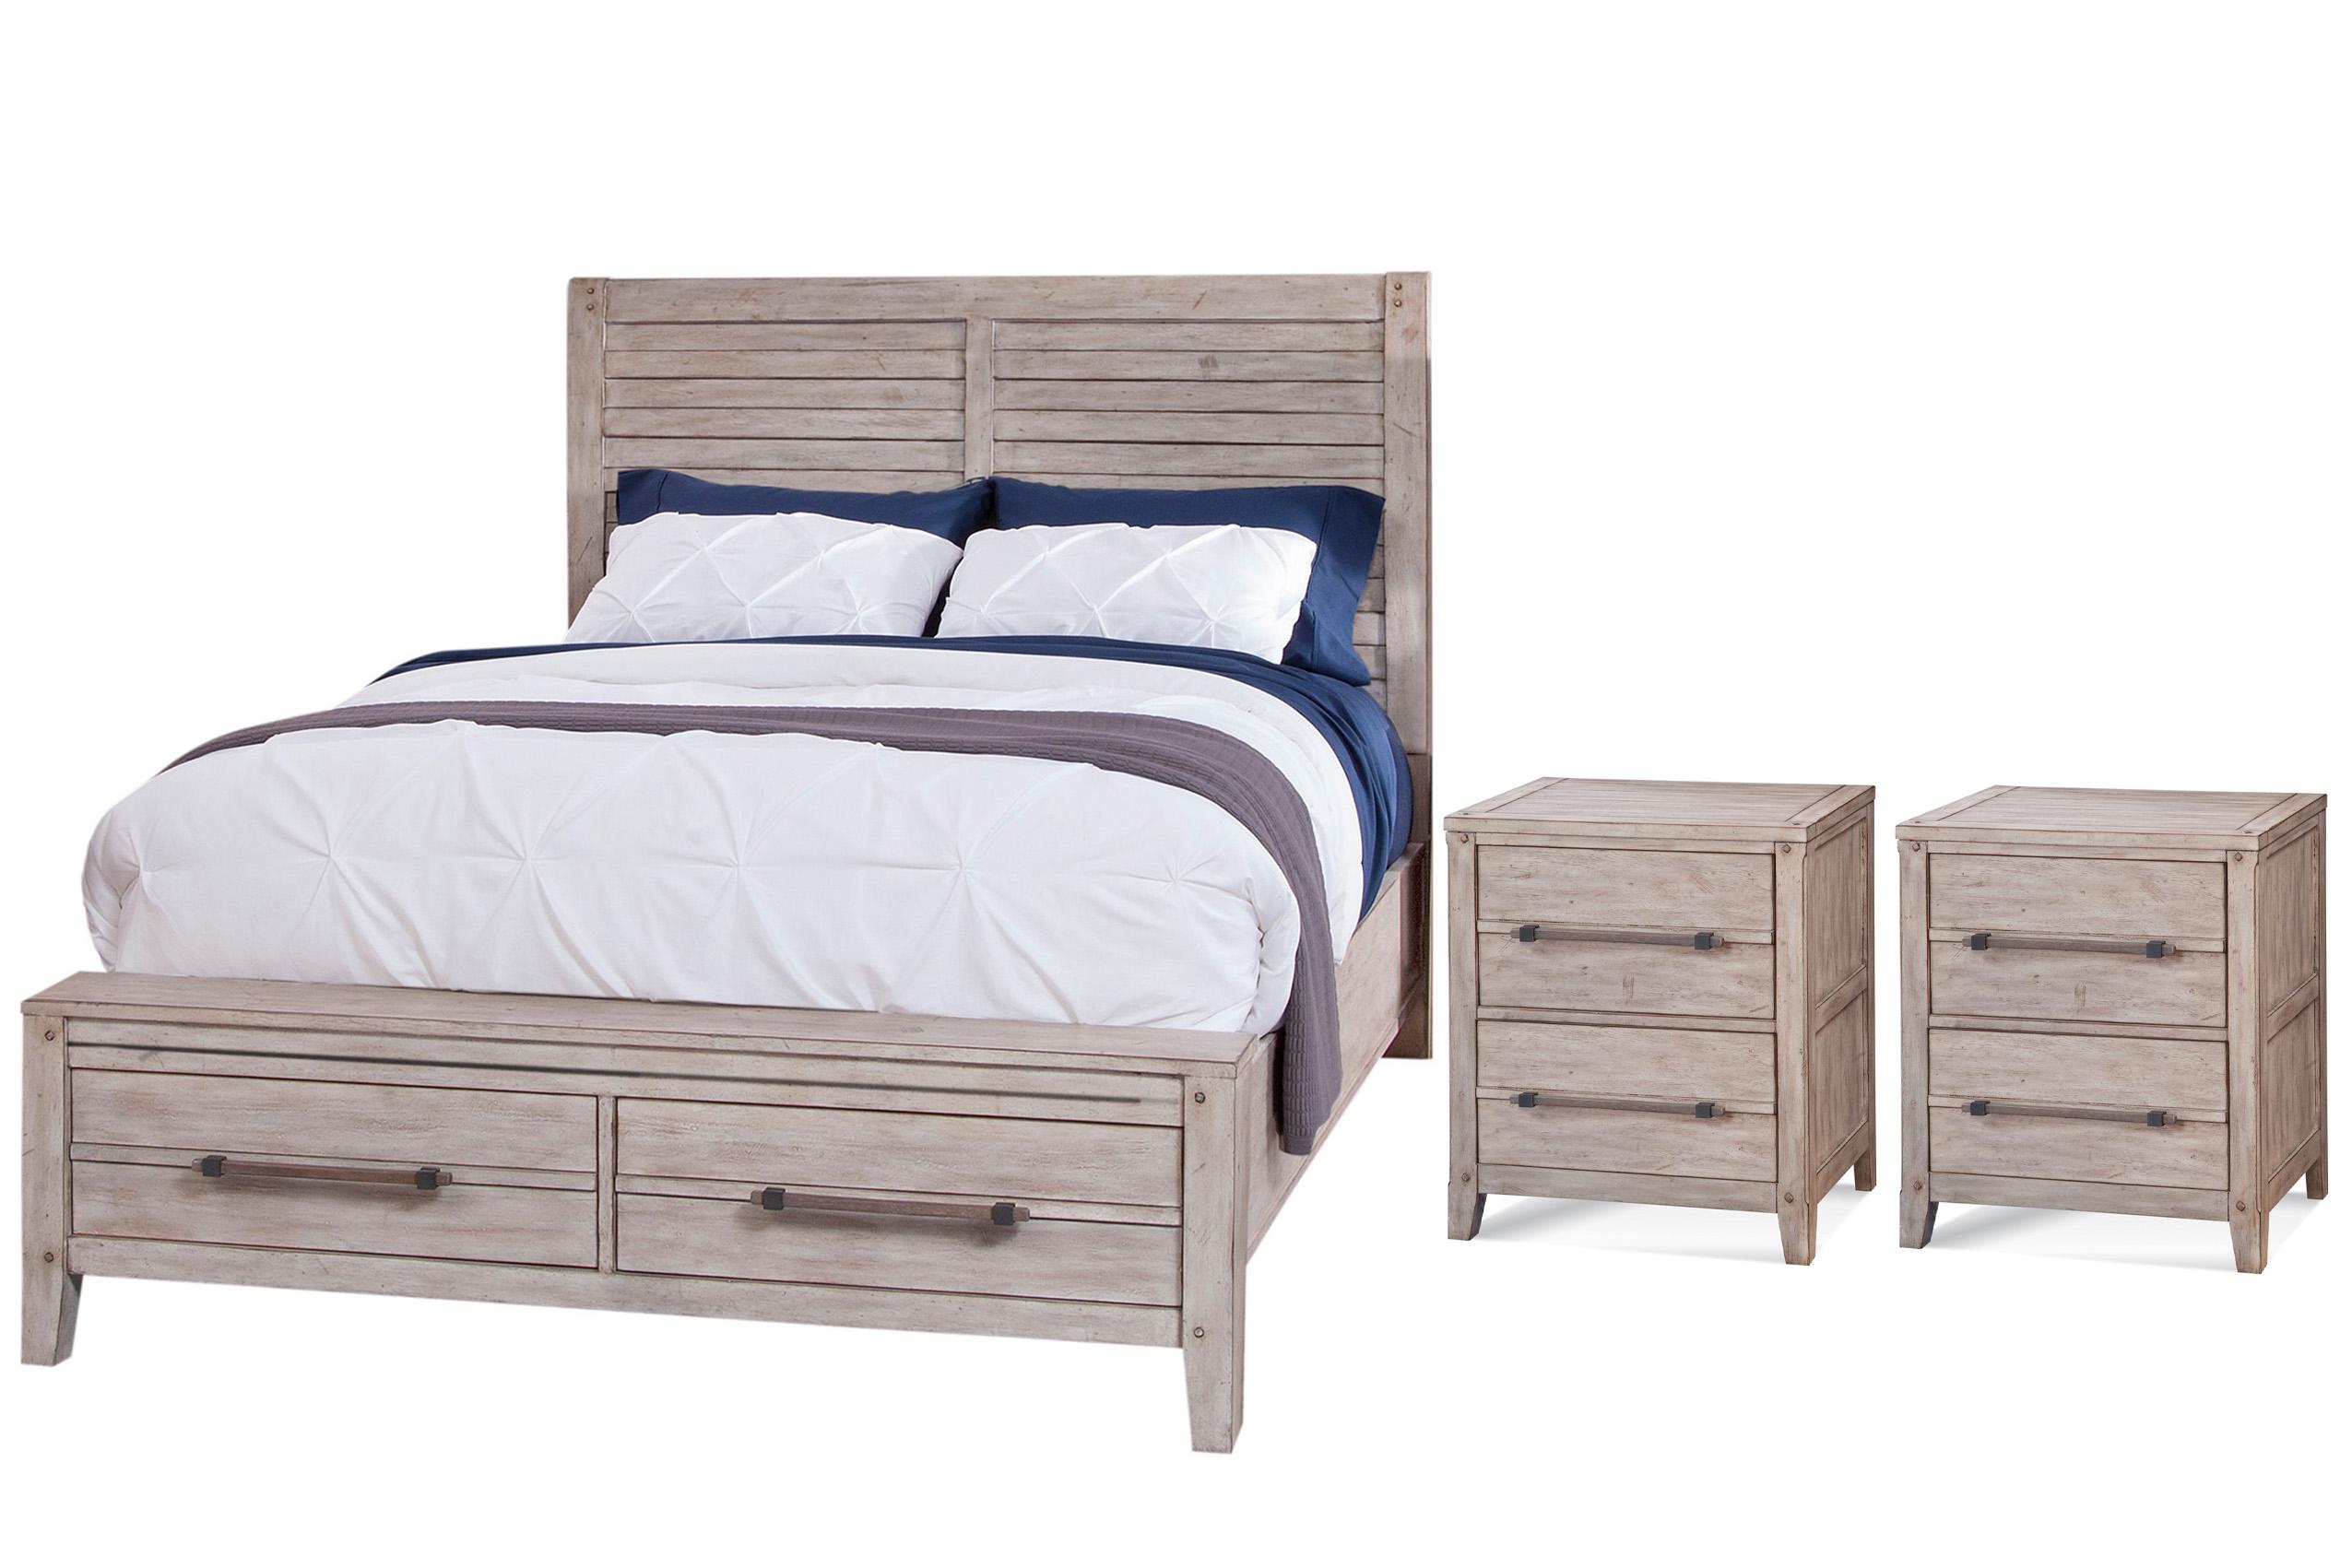 Classic, Traditional Panel Bedroom Set AURORA 2810-50PSB 2810-50PSB-2810-420-2N-3PC in whitewash 